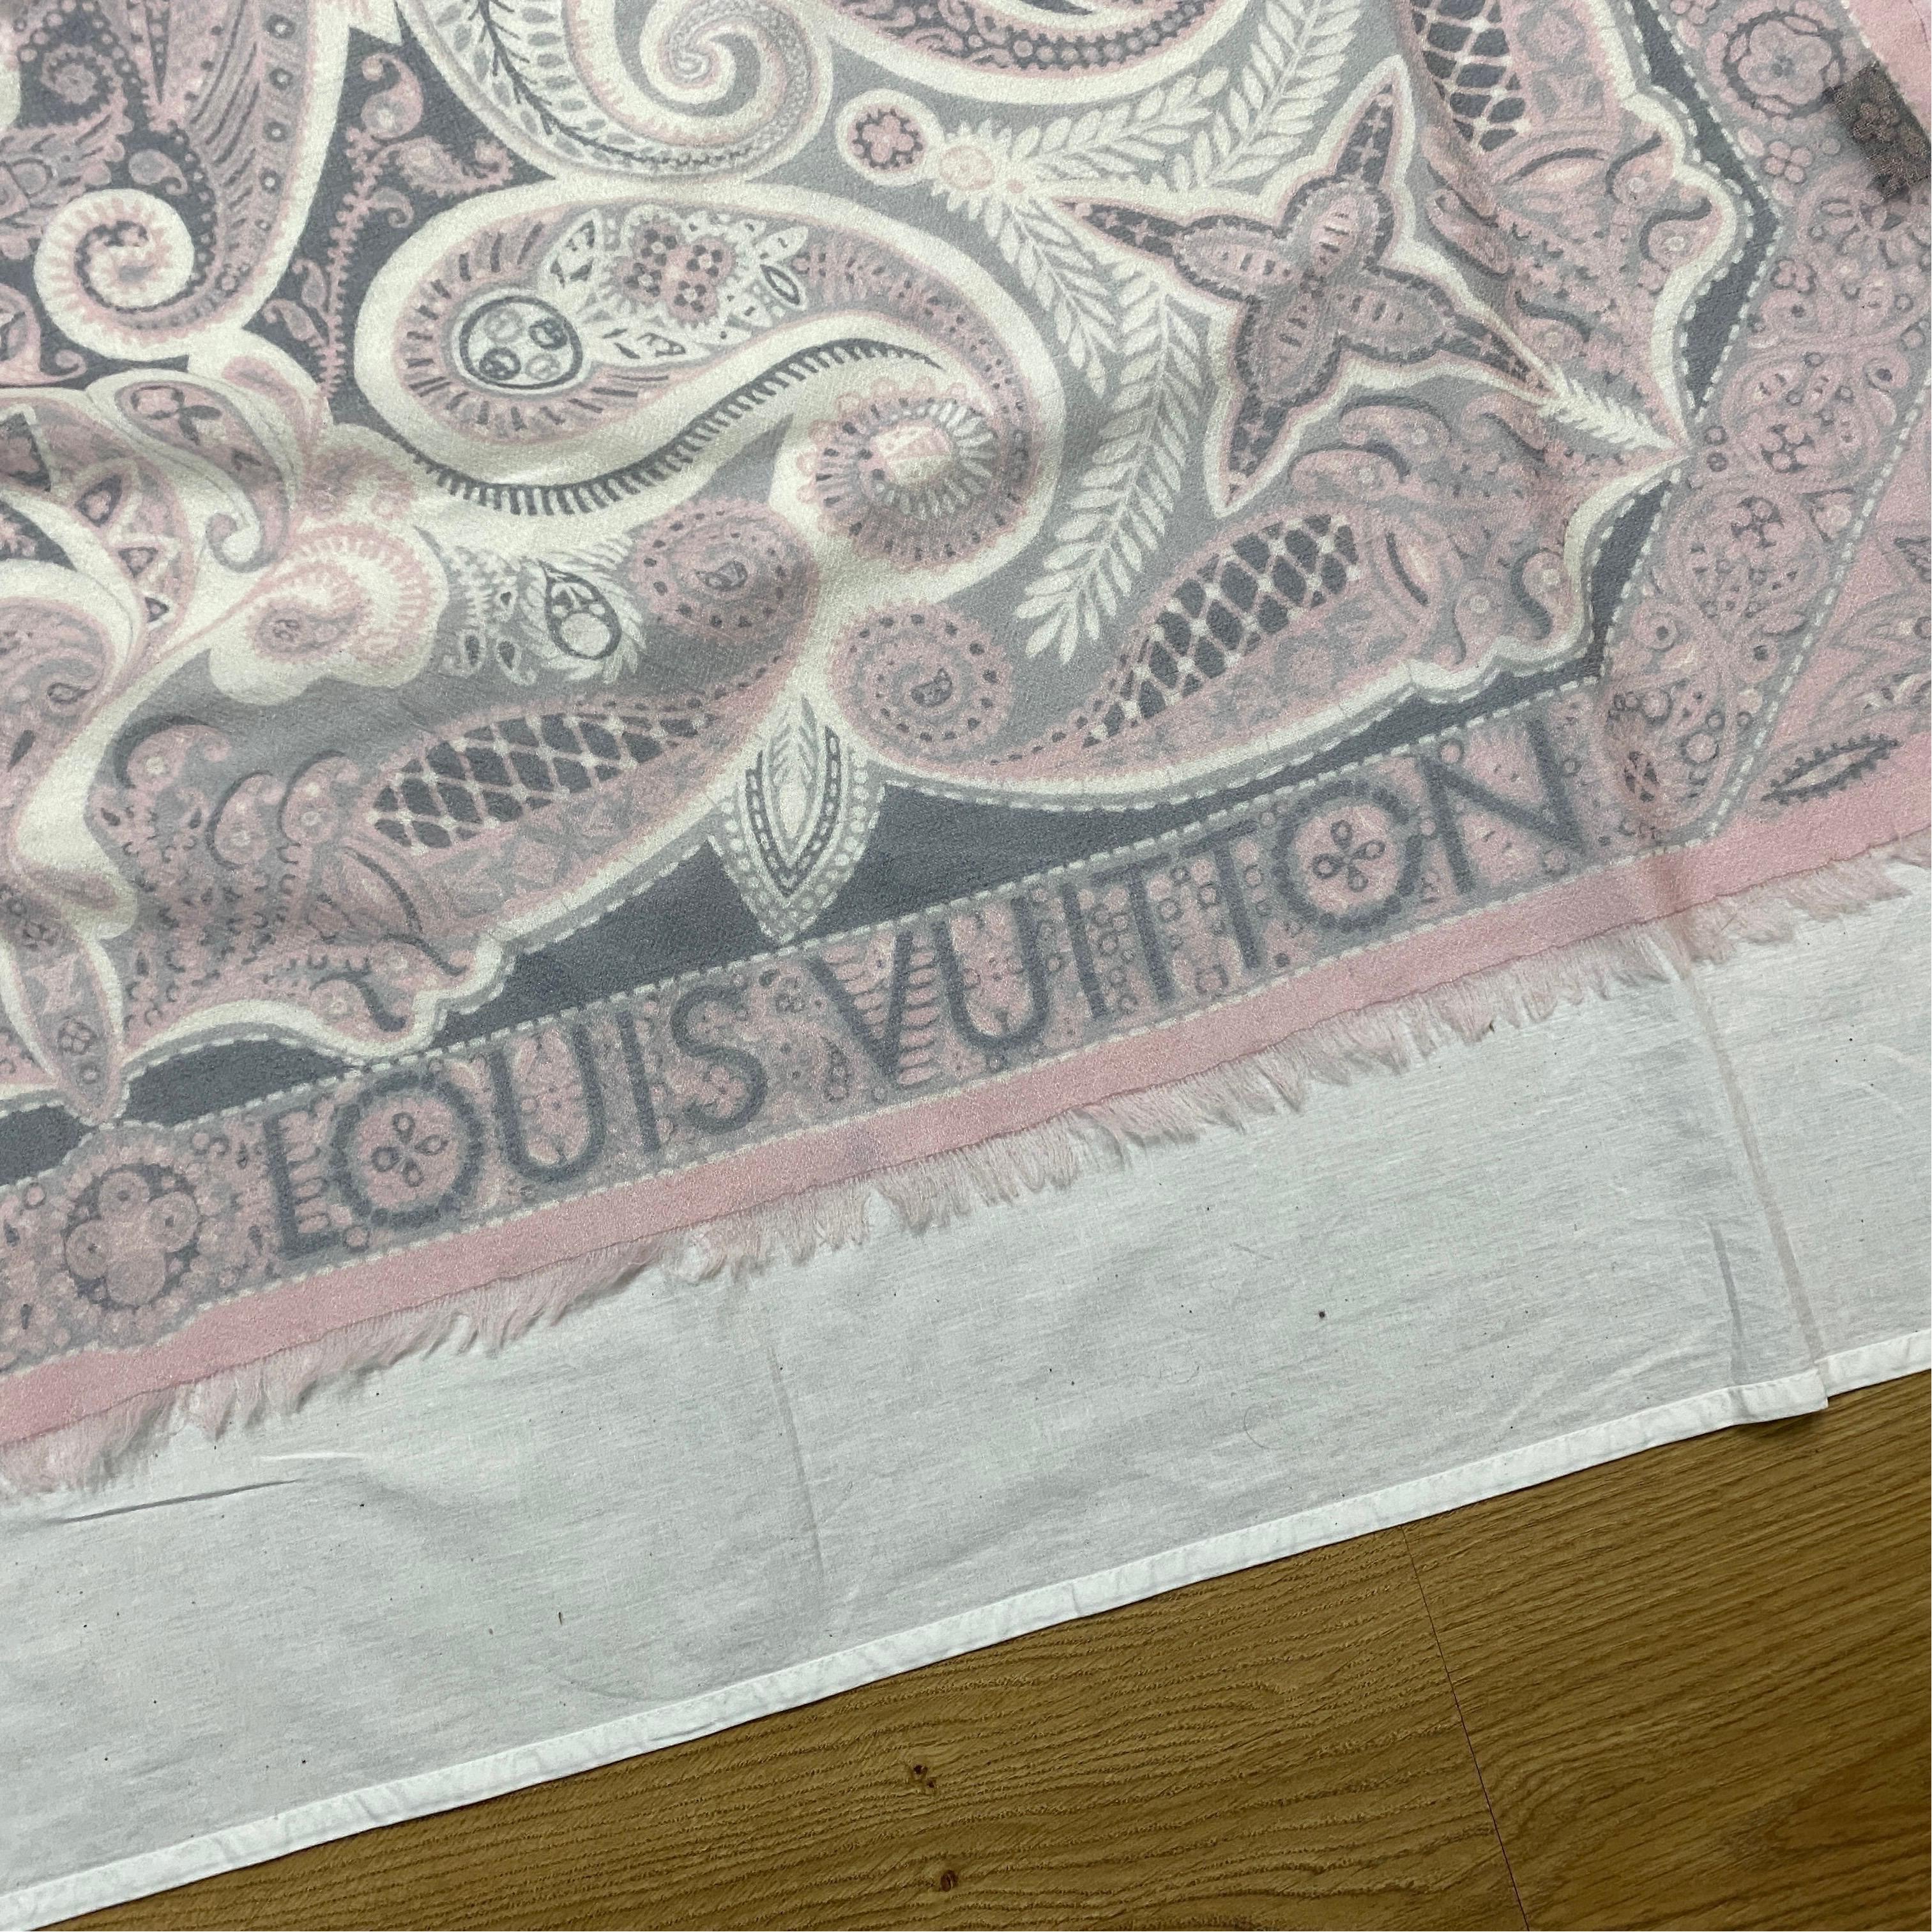 Louis Vuitton Scarf in pure White Cashmere with a particular Pink and Gray design. Dimensions 128x188 cm.